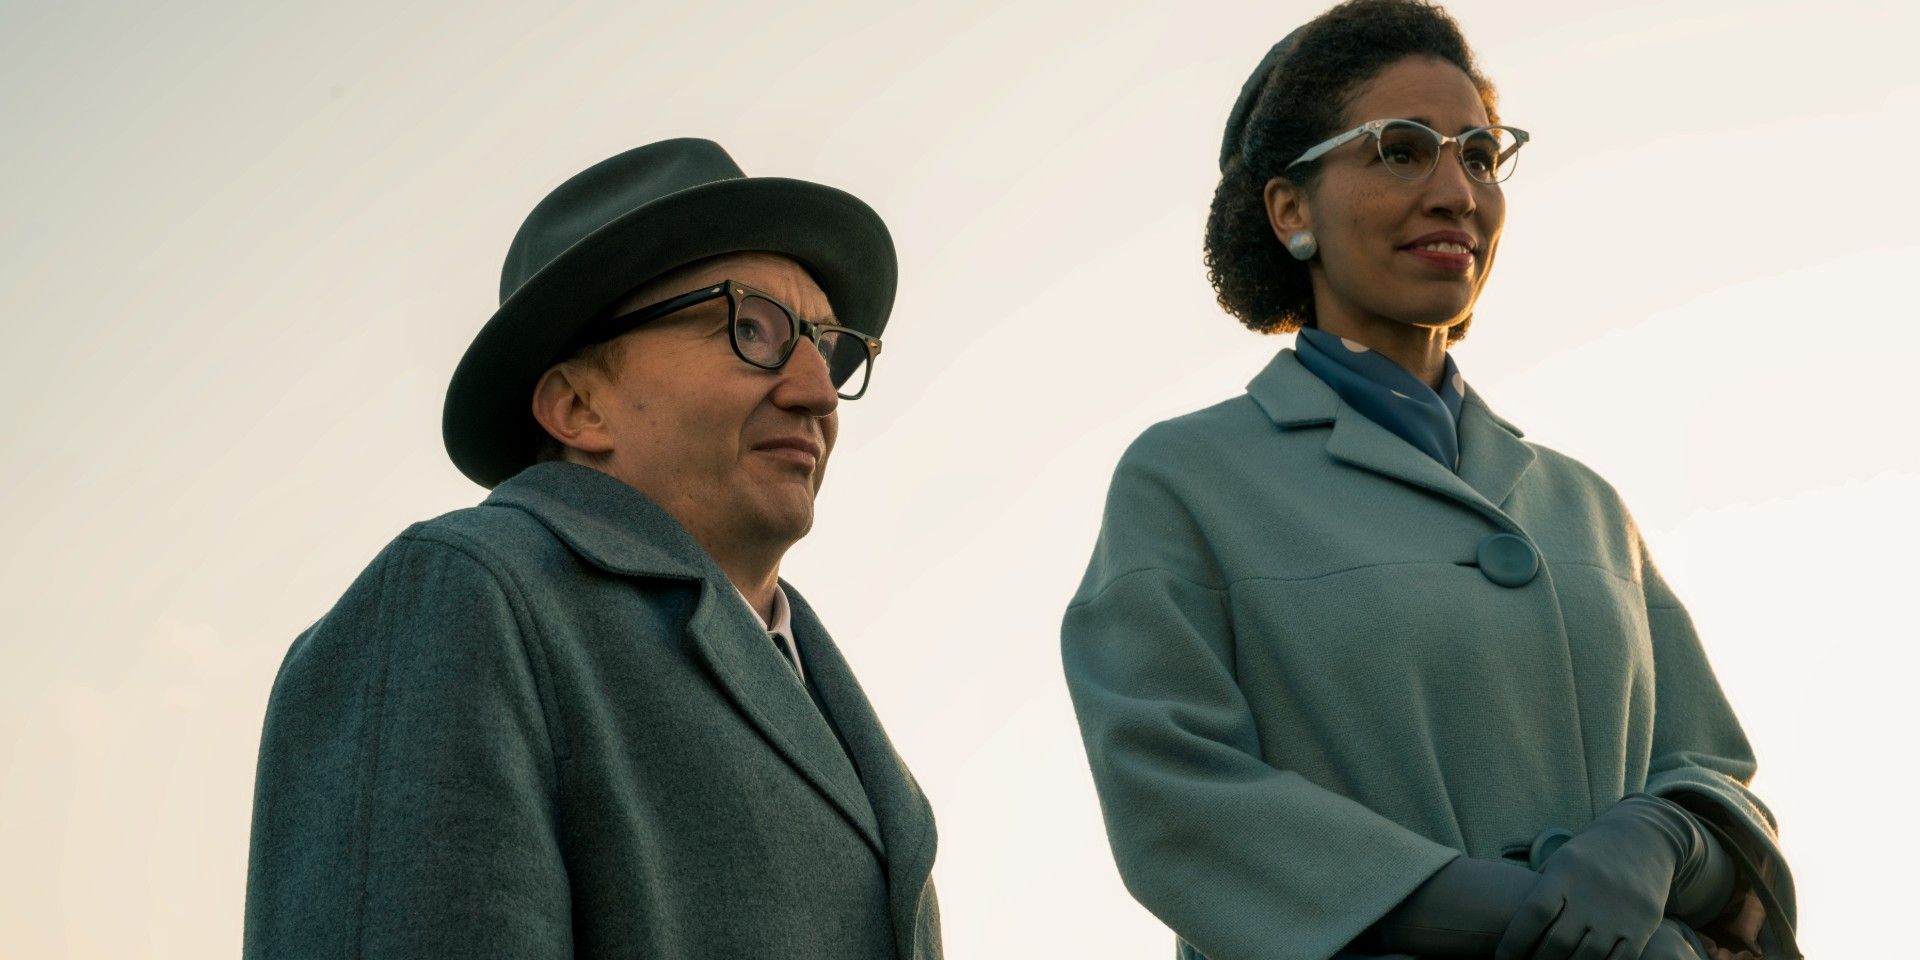 Herb and Dot looking in the same direction in The Umbrella Academy.